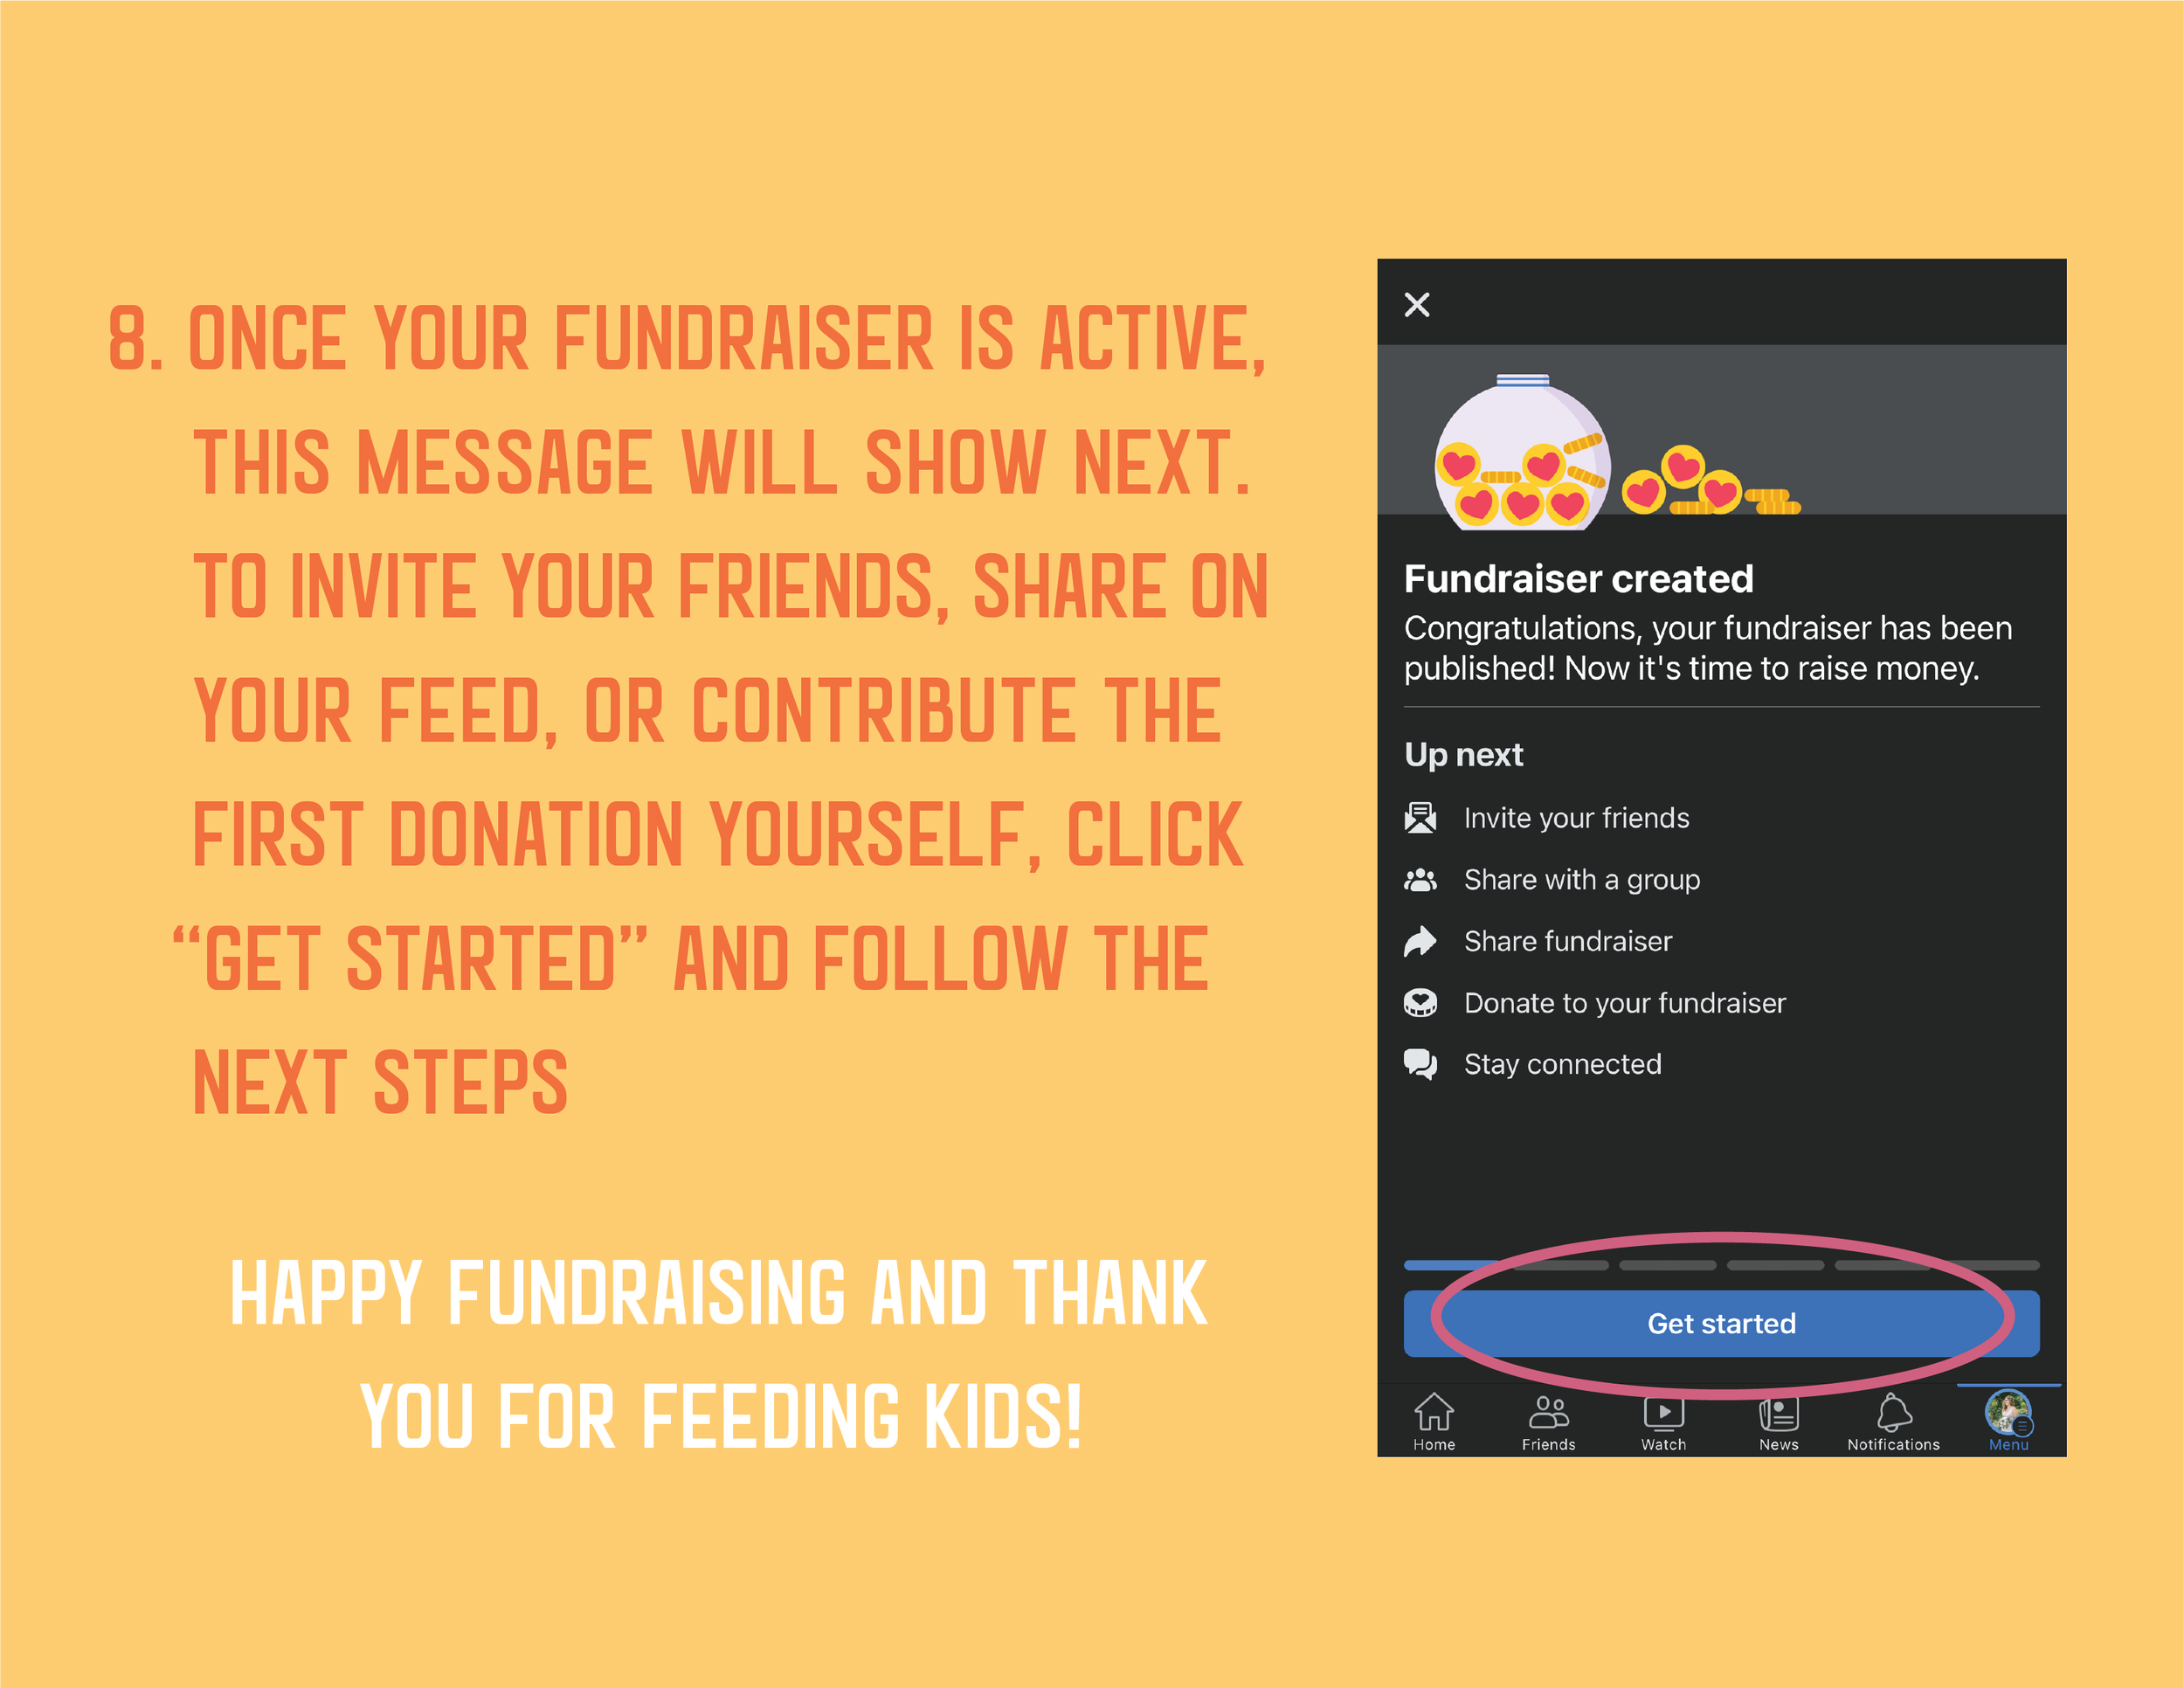 fb-fundraiser-guide-17.png